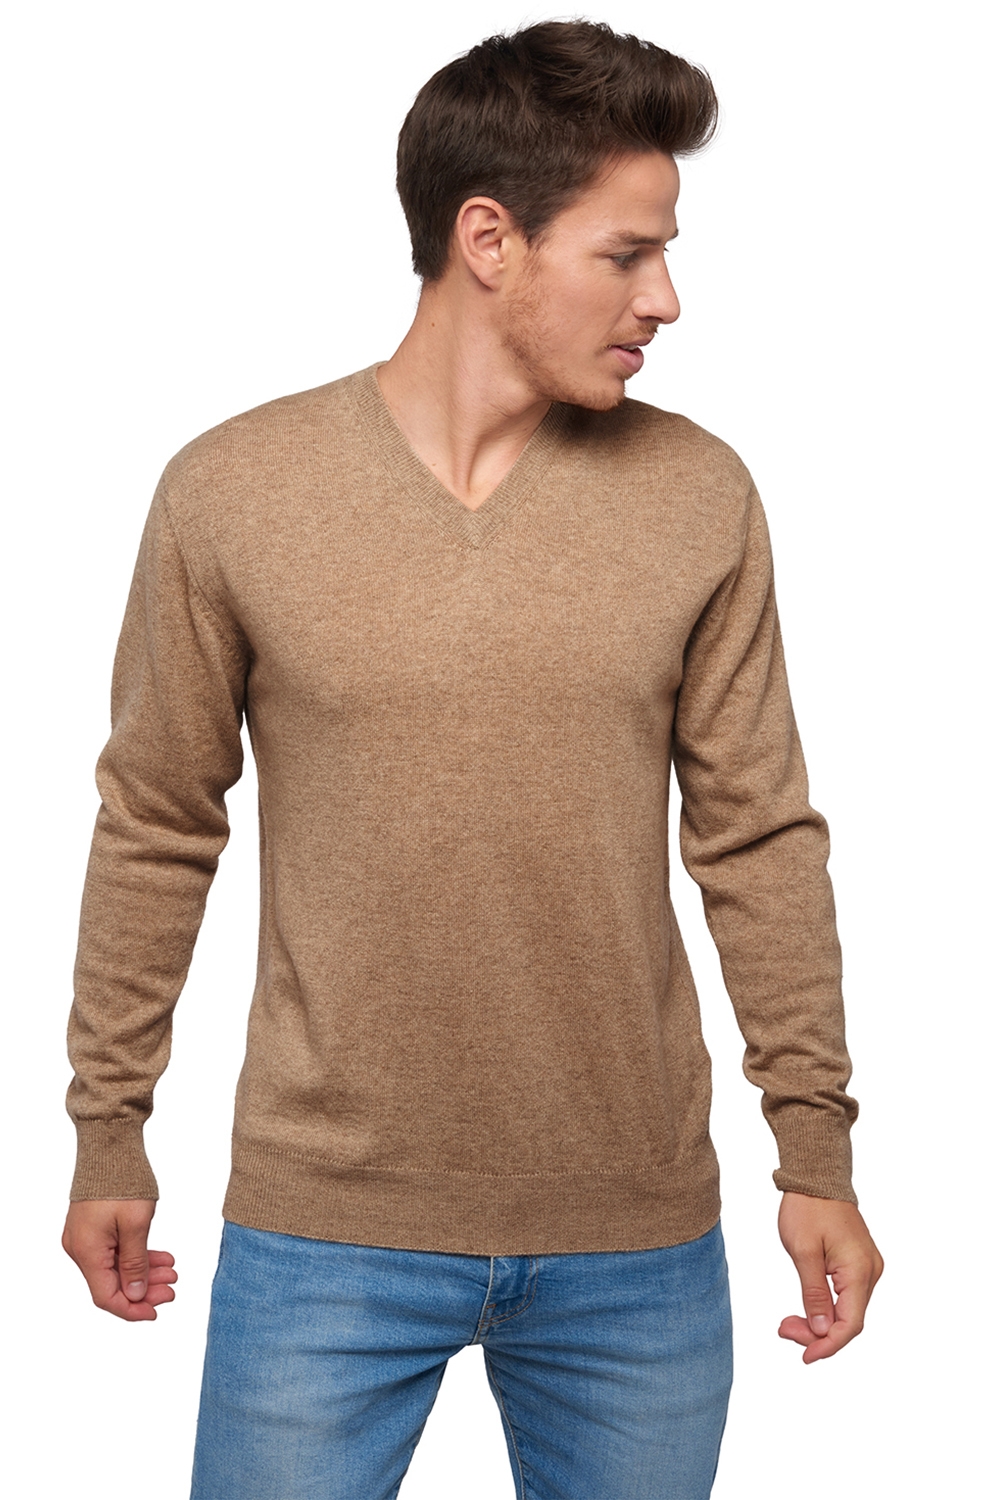 Cachemire Naturel pull homme cachemire couleur naturelle natural poppy 4f natural brown m